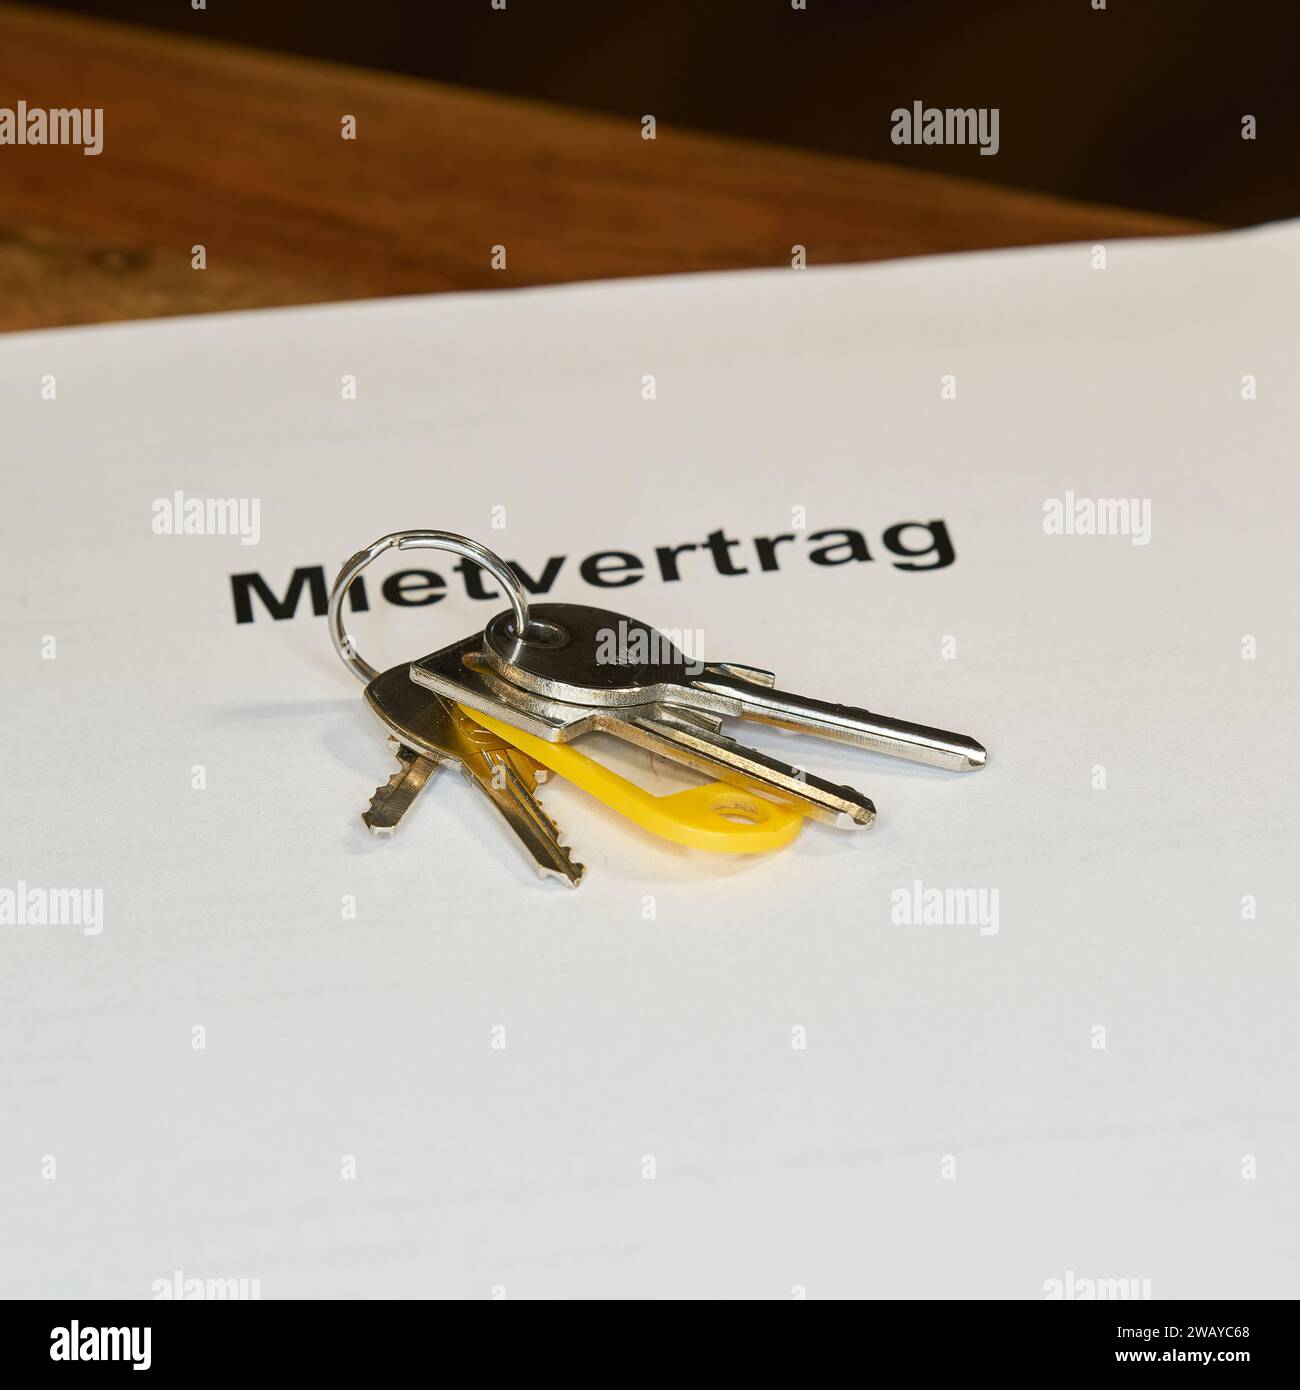 Keys and german rental contract, Mietvertrag, for a new apartment are on a table Stock Photo